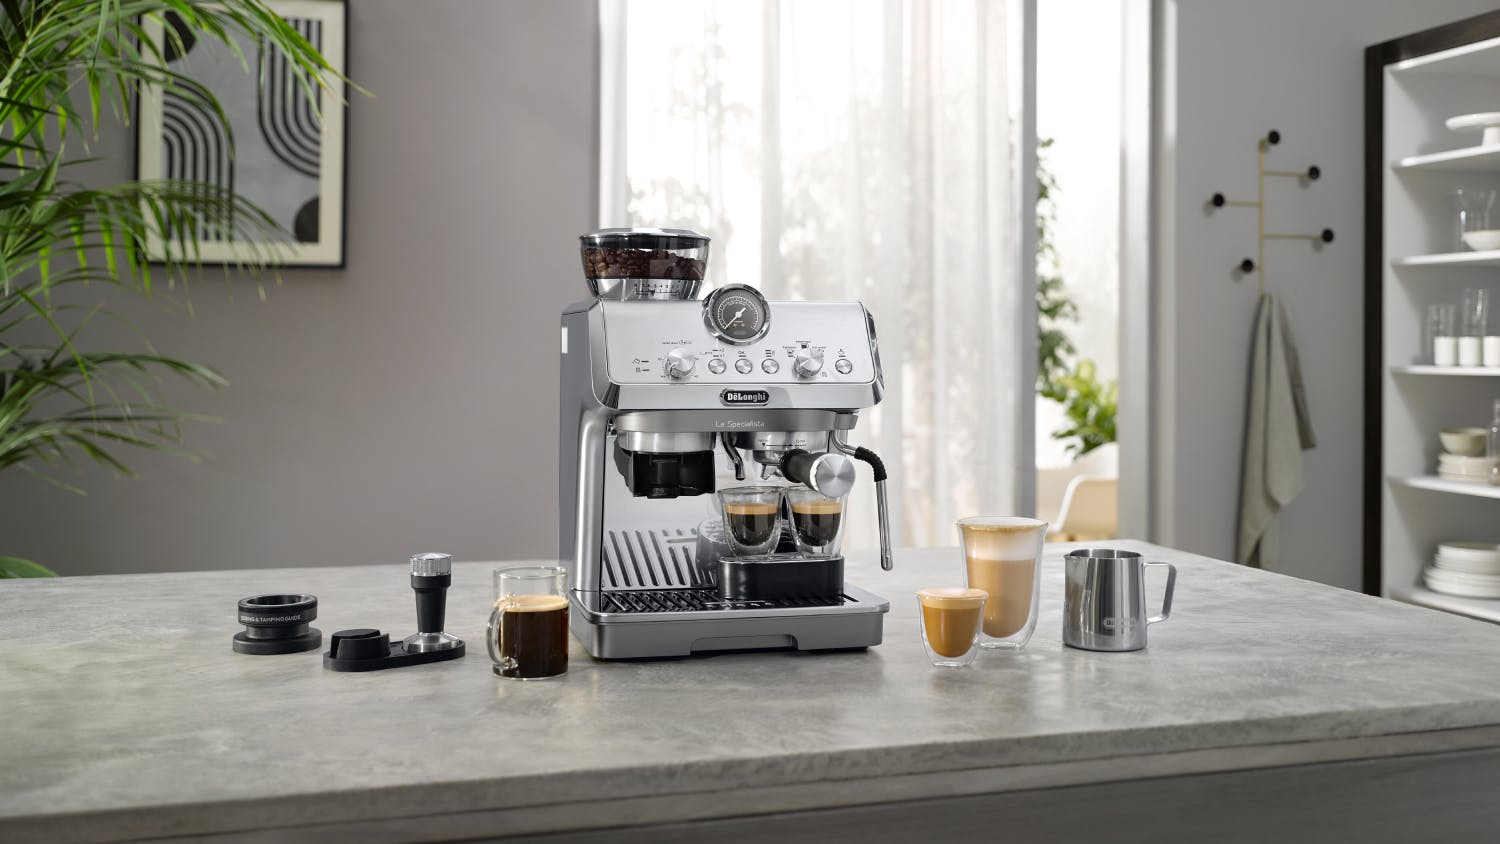 DeLonghi Stainless Steel Manual Espresso Machine at